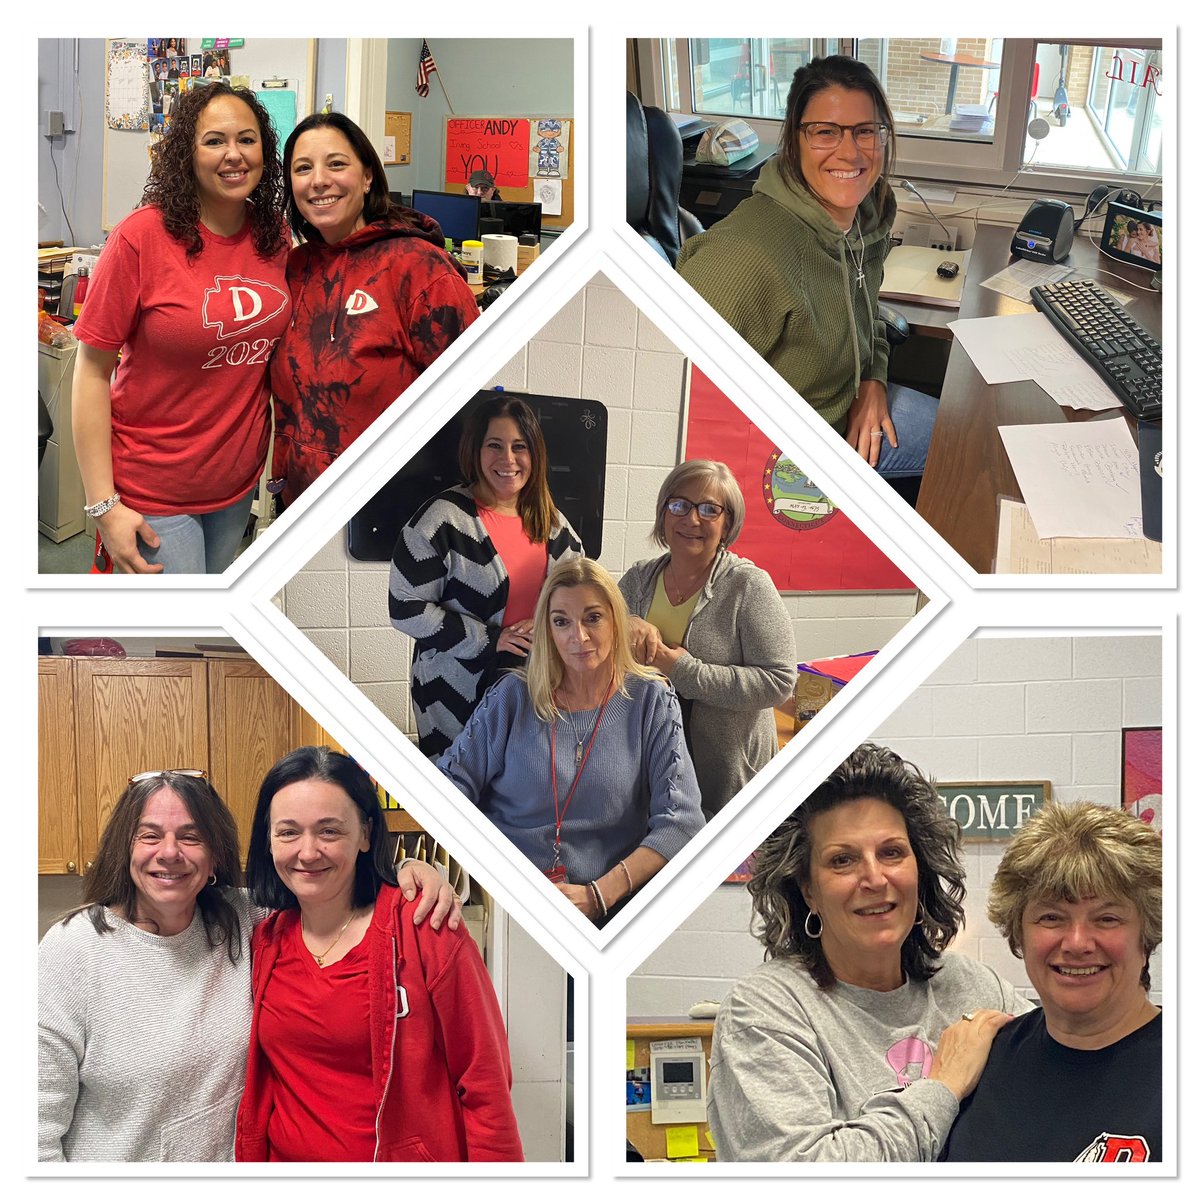 Please join us in thanking our incredible Administrative Professionals as we celebrate their tireless & supportive efforts to stay 1 step ahead so we all don’t fall behind. You are amazing! @DerbyRedRaider @DerbyMiddle_CT @Bradley_School @Irving_School @DerbyLRU @AFSCMECT4